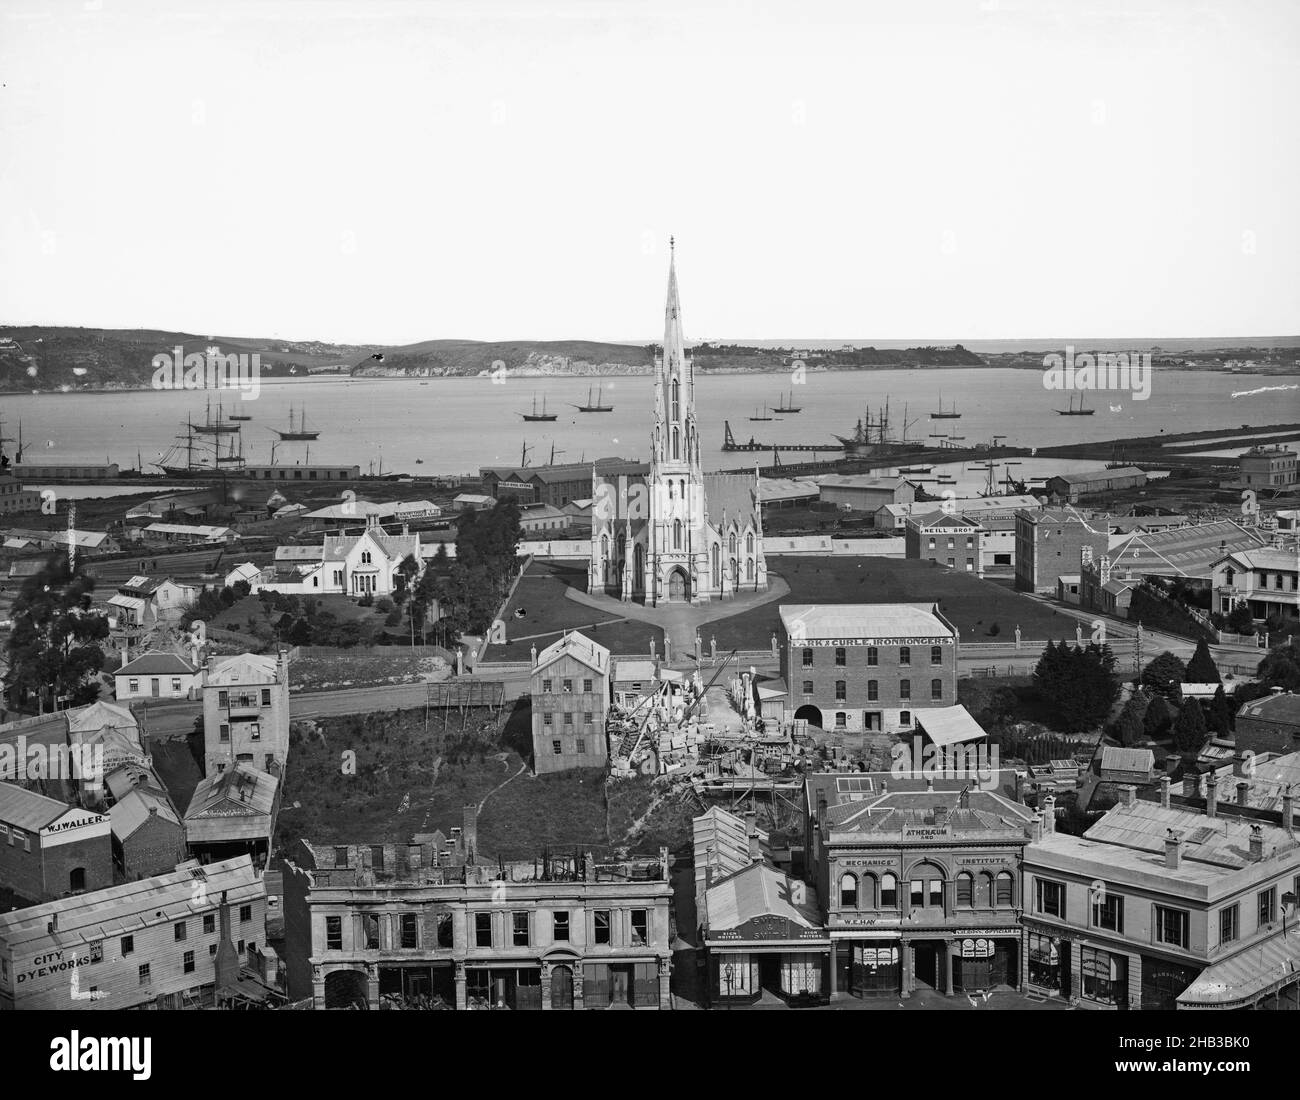 [Dunedin], Burton Brothers studio, photography studio, Dunedin, black-and-white photography, View looking at Moray Place - venue of the first (1st) church of Dunedin and out across the harbour. Shops and partially demolished house are in sight in the foreground Stock Photo